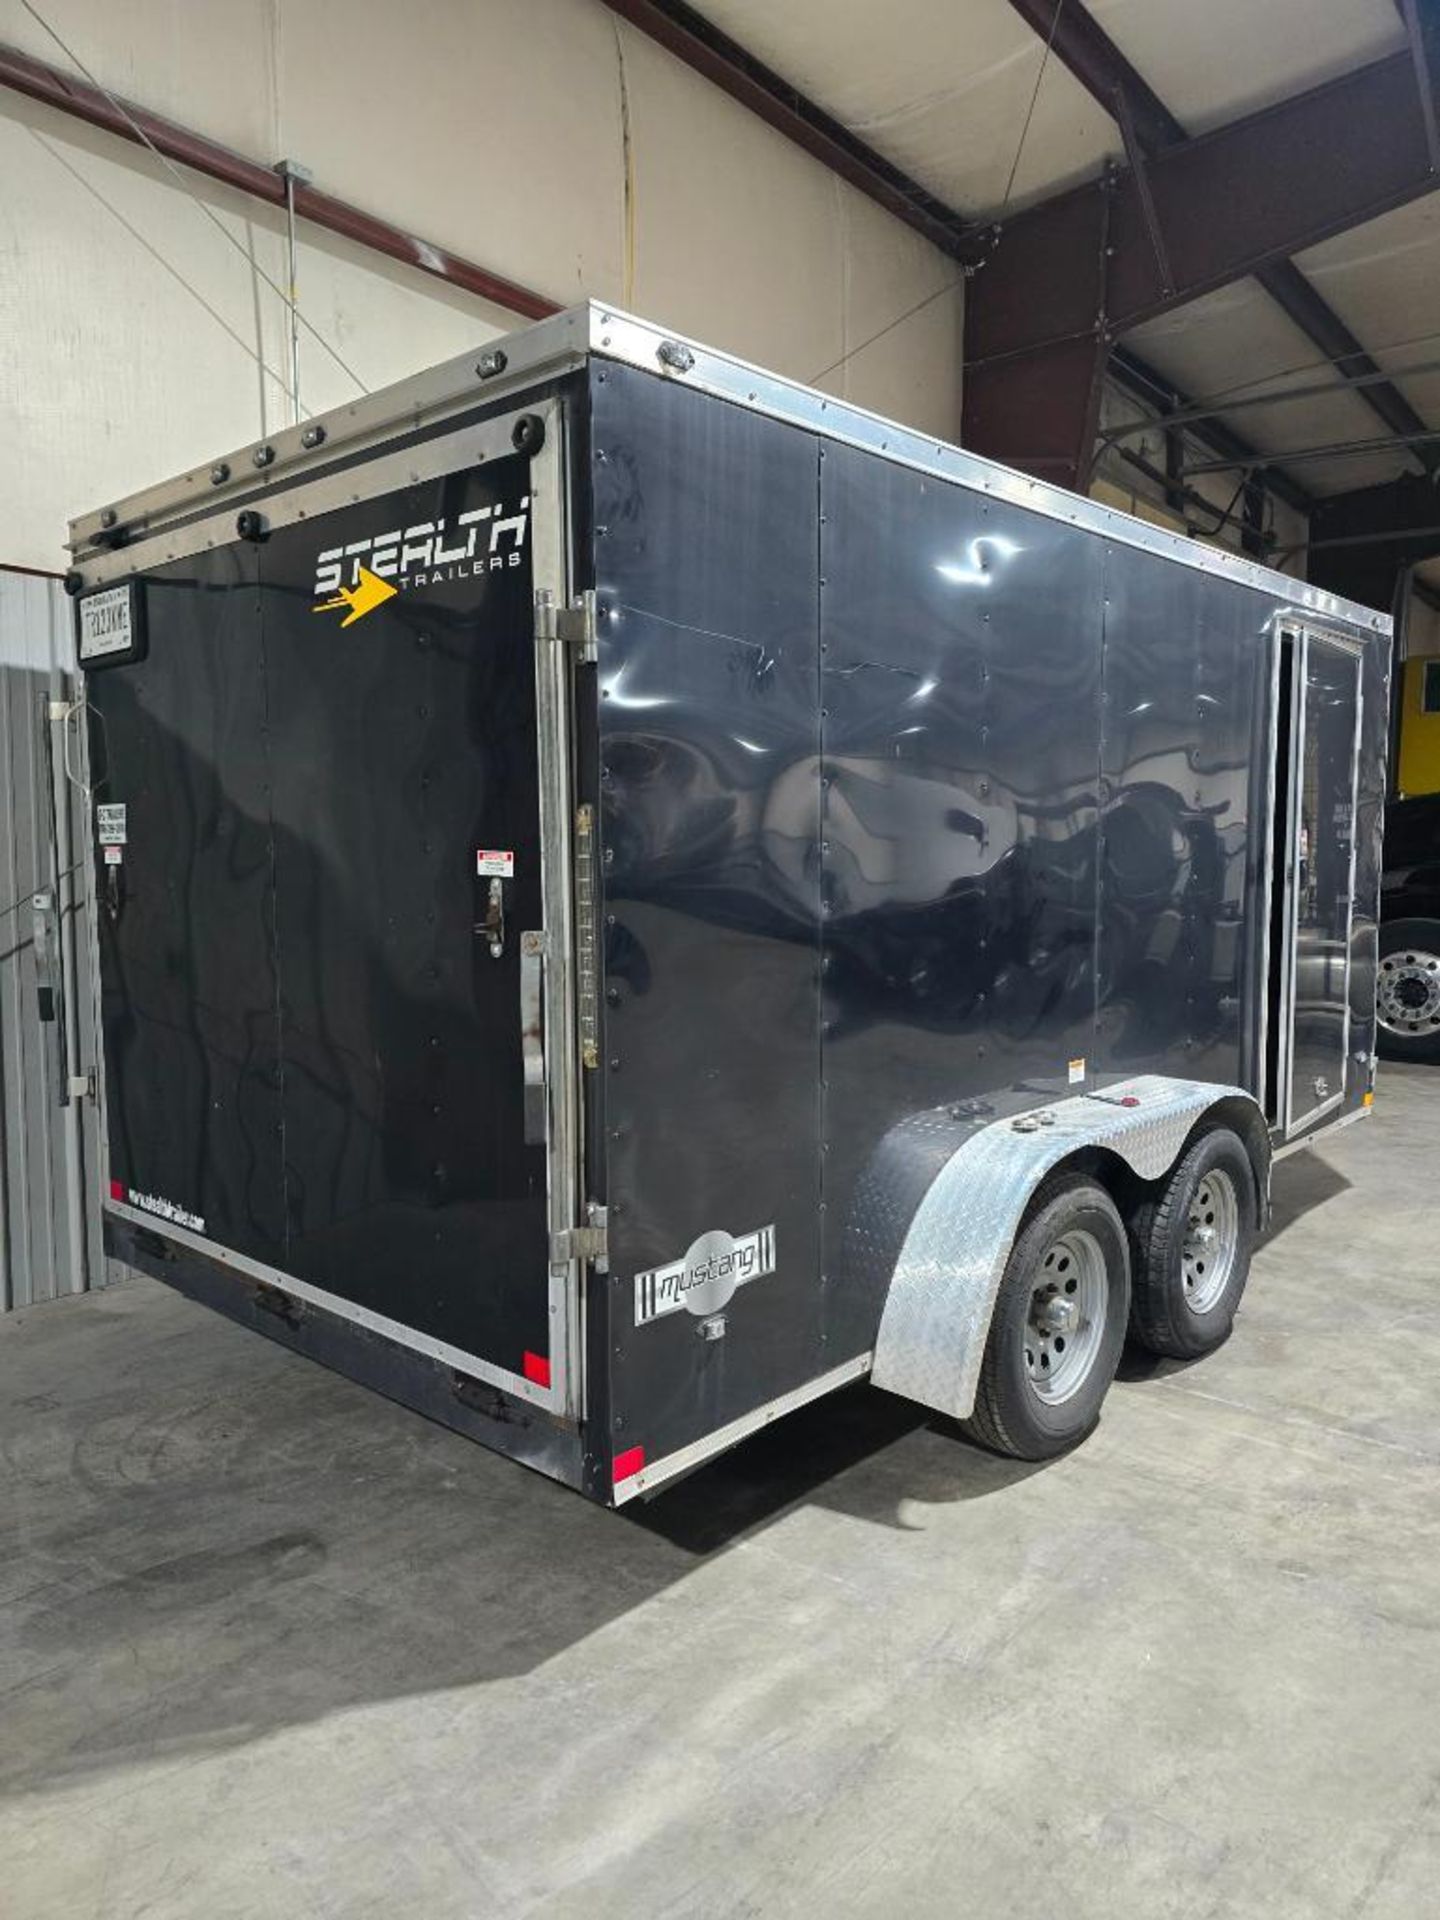 2017 Stealth Tandem Axle Cargo Trailer, VIN 068410 - Image 7 of 10